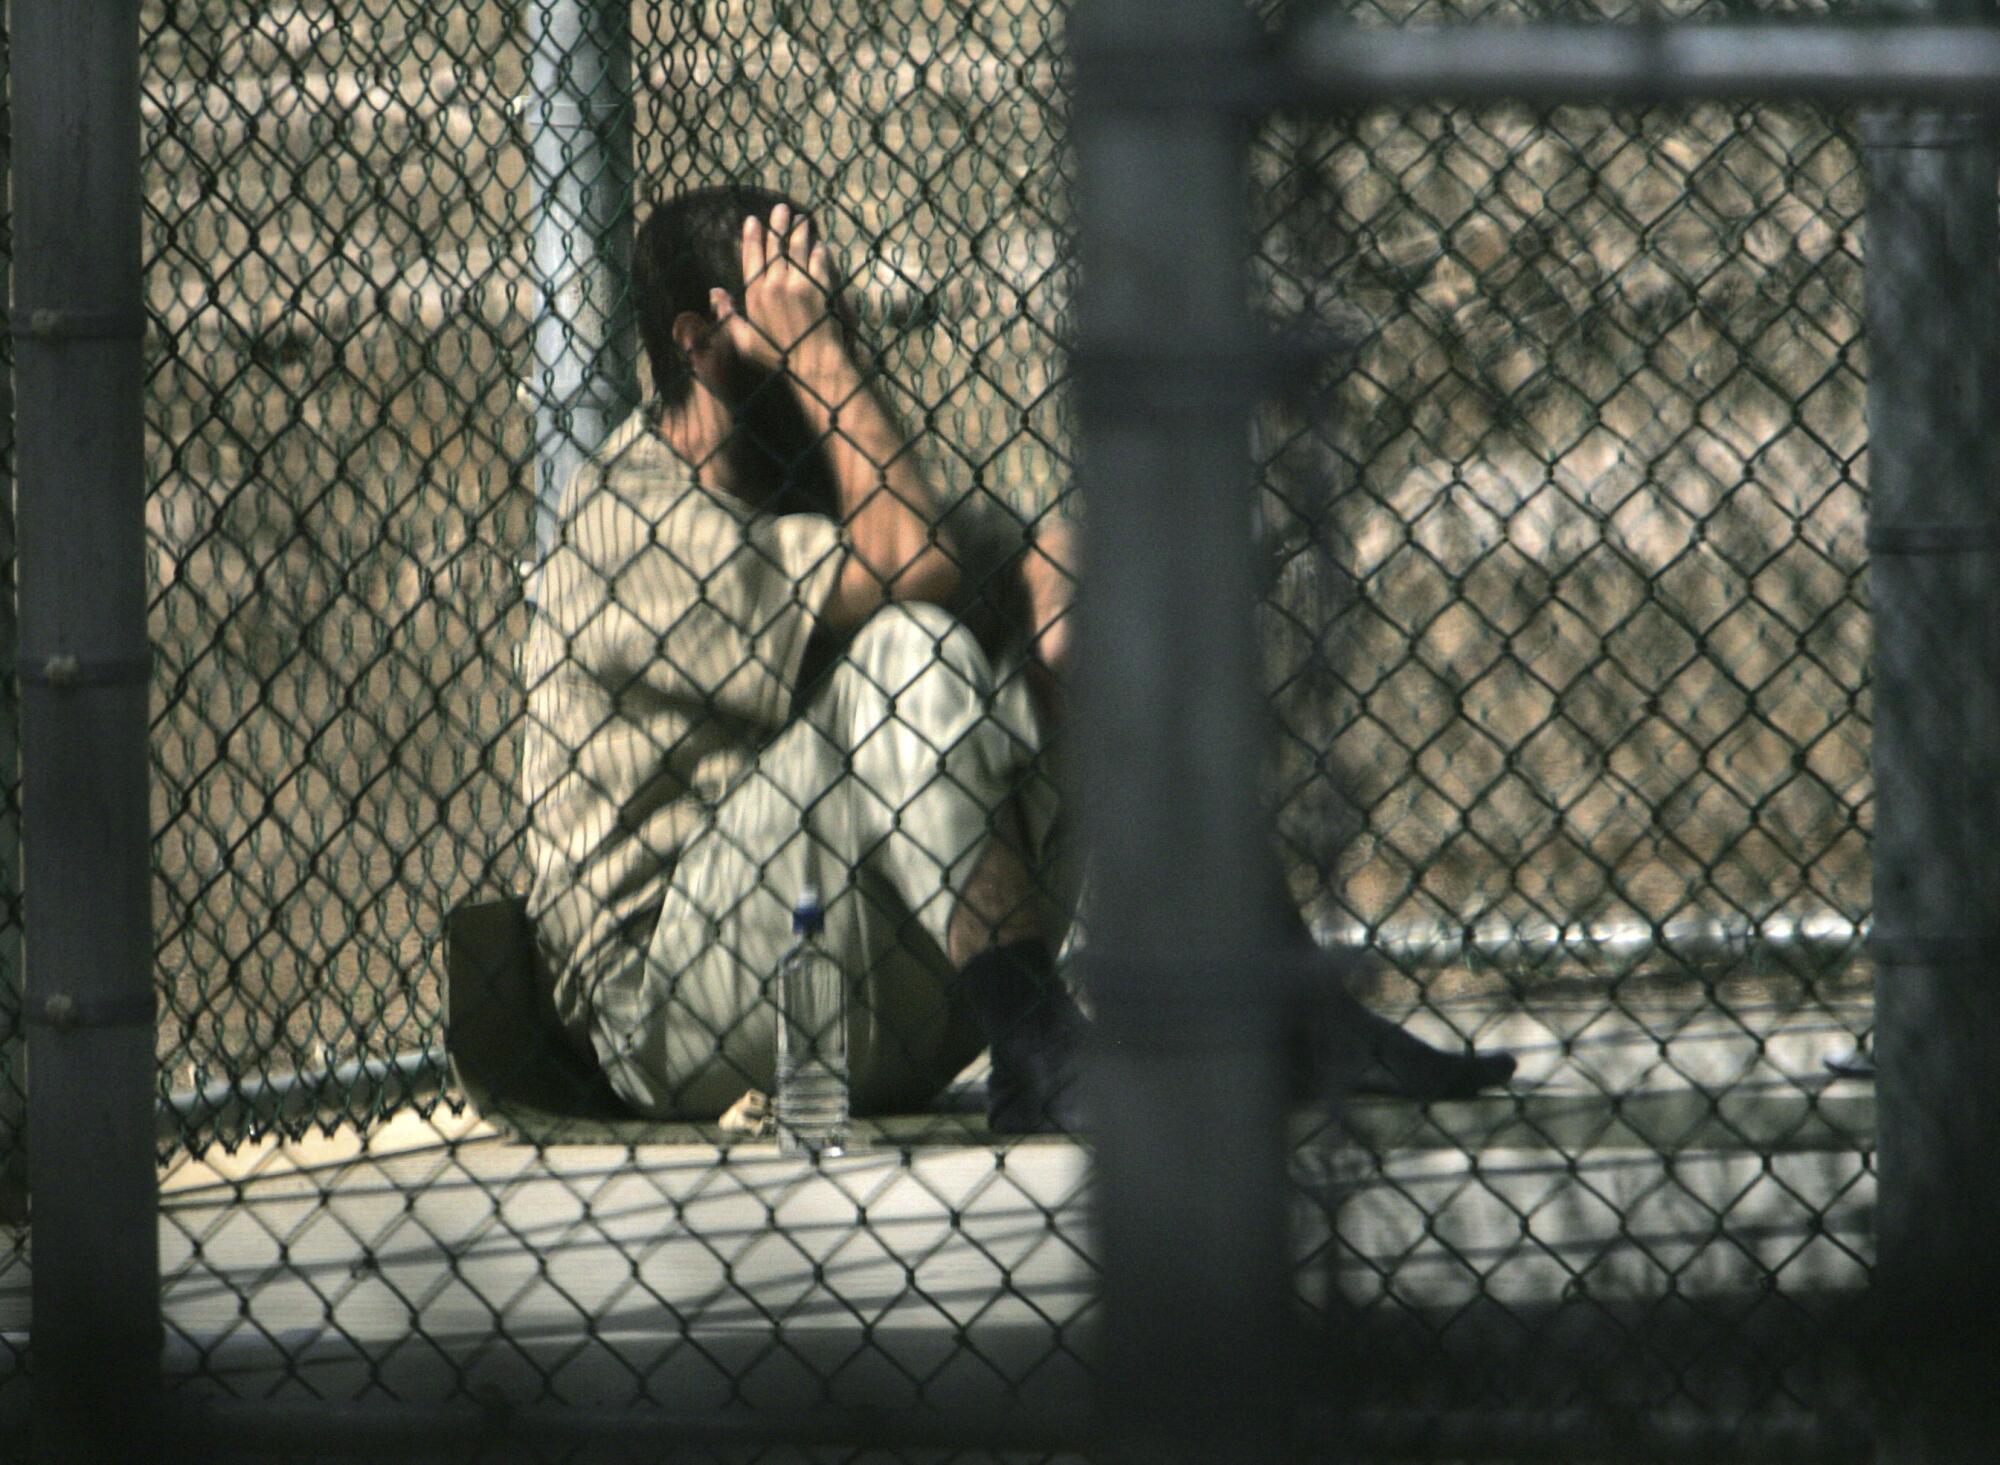 A man with dark hair and beard holds a hand to his face as he sits behind a wire fence 